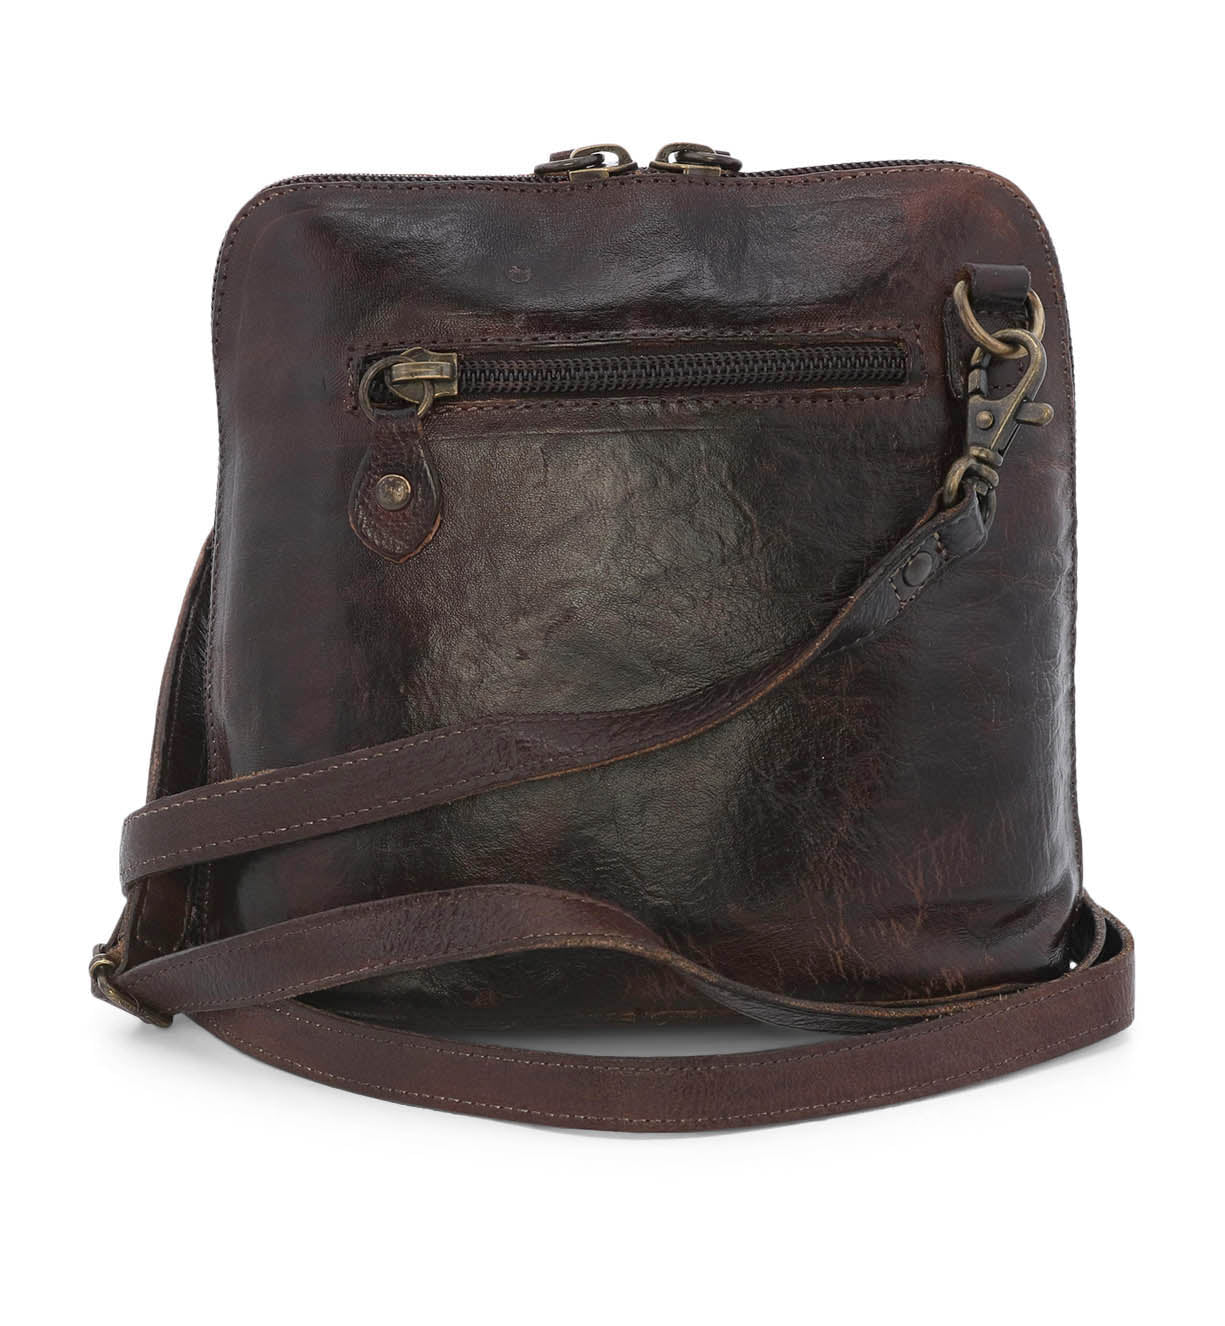 A brown leather Ventura cross body bag with a strap by Bed Stu.